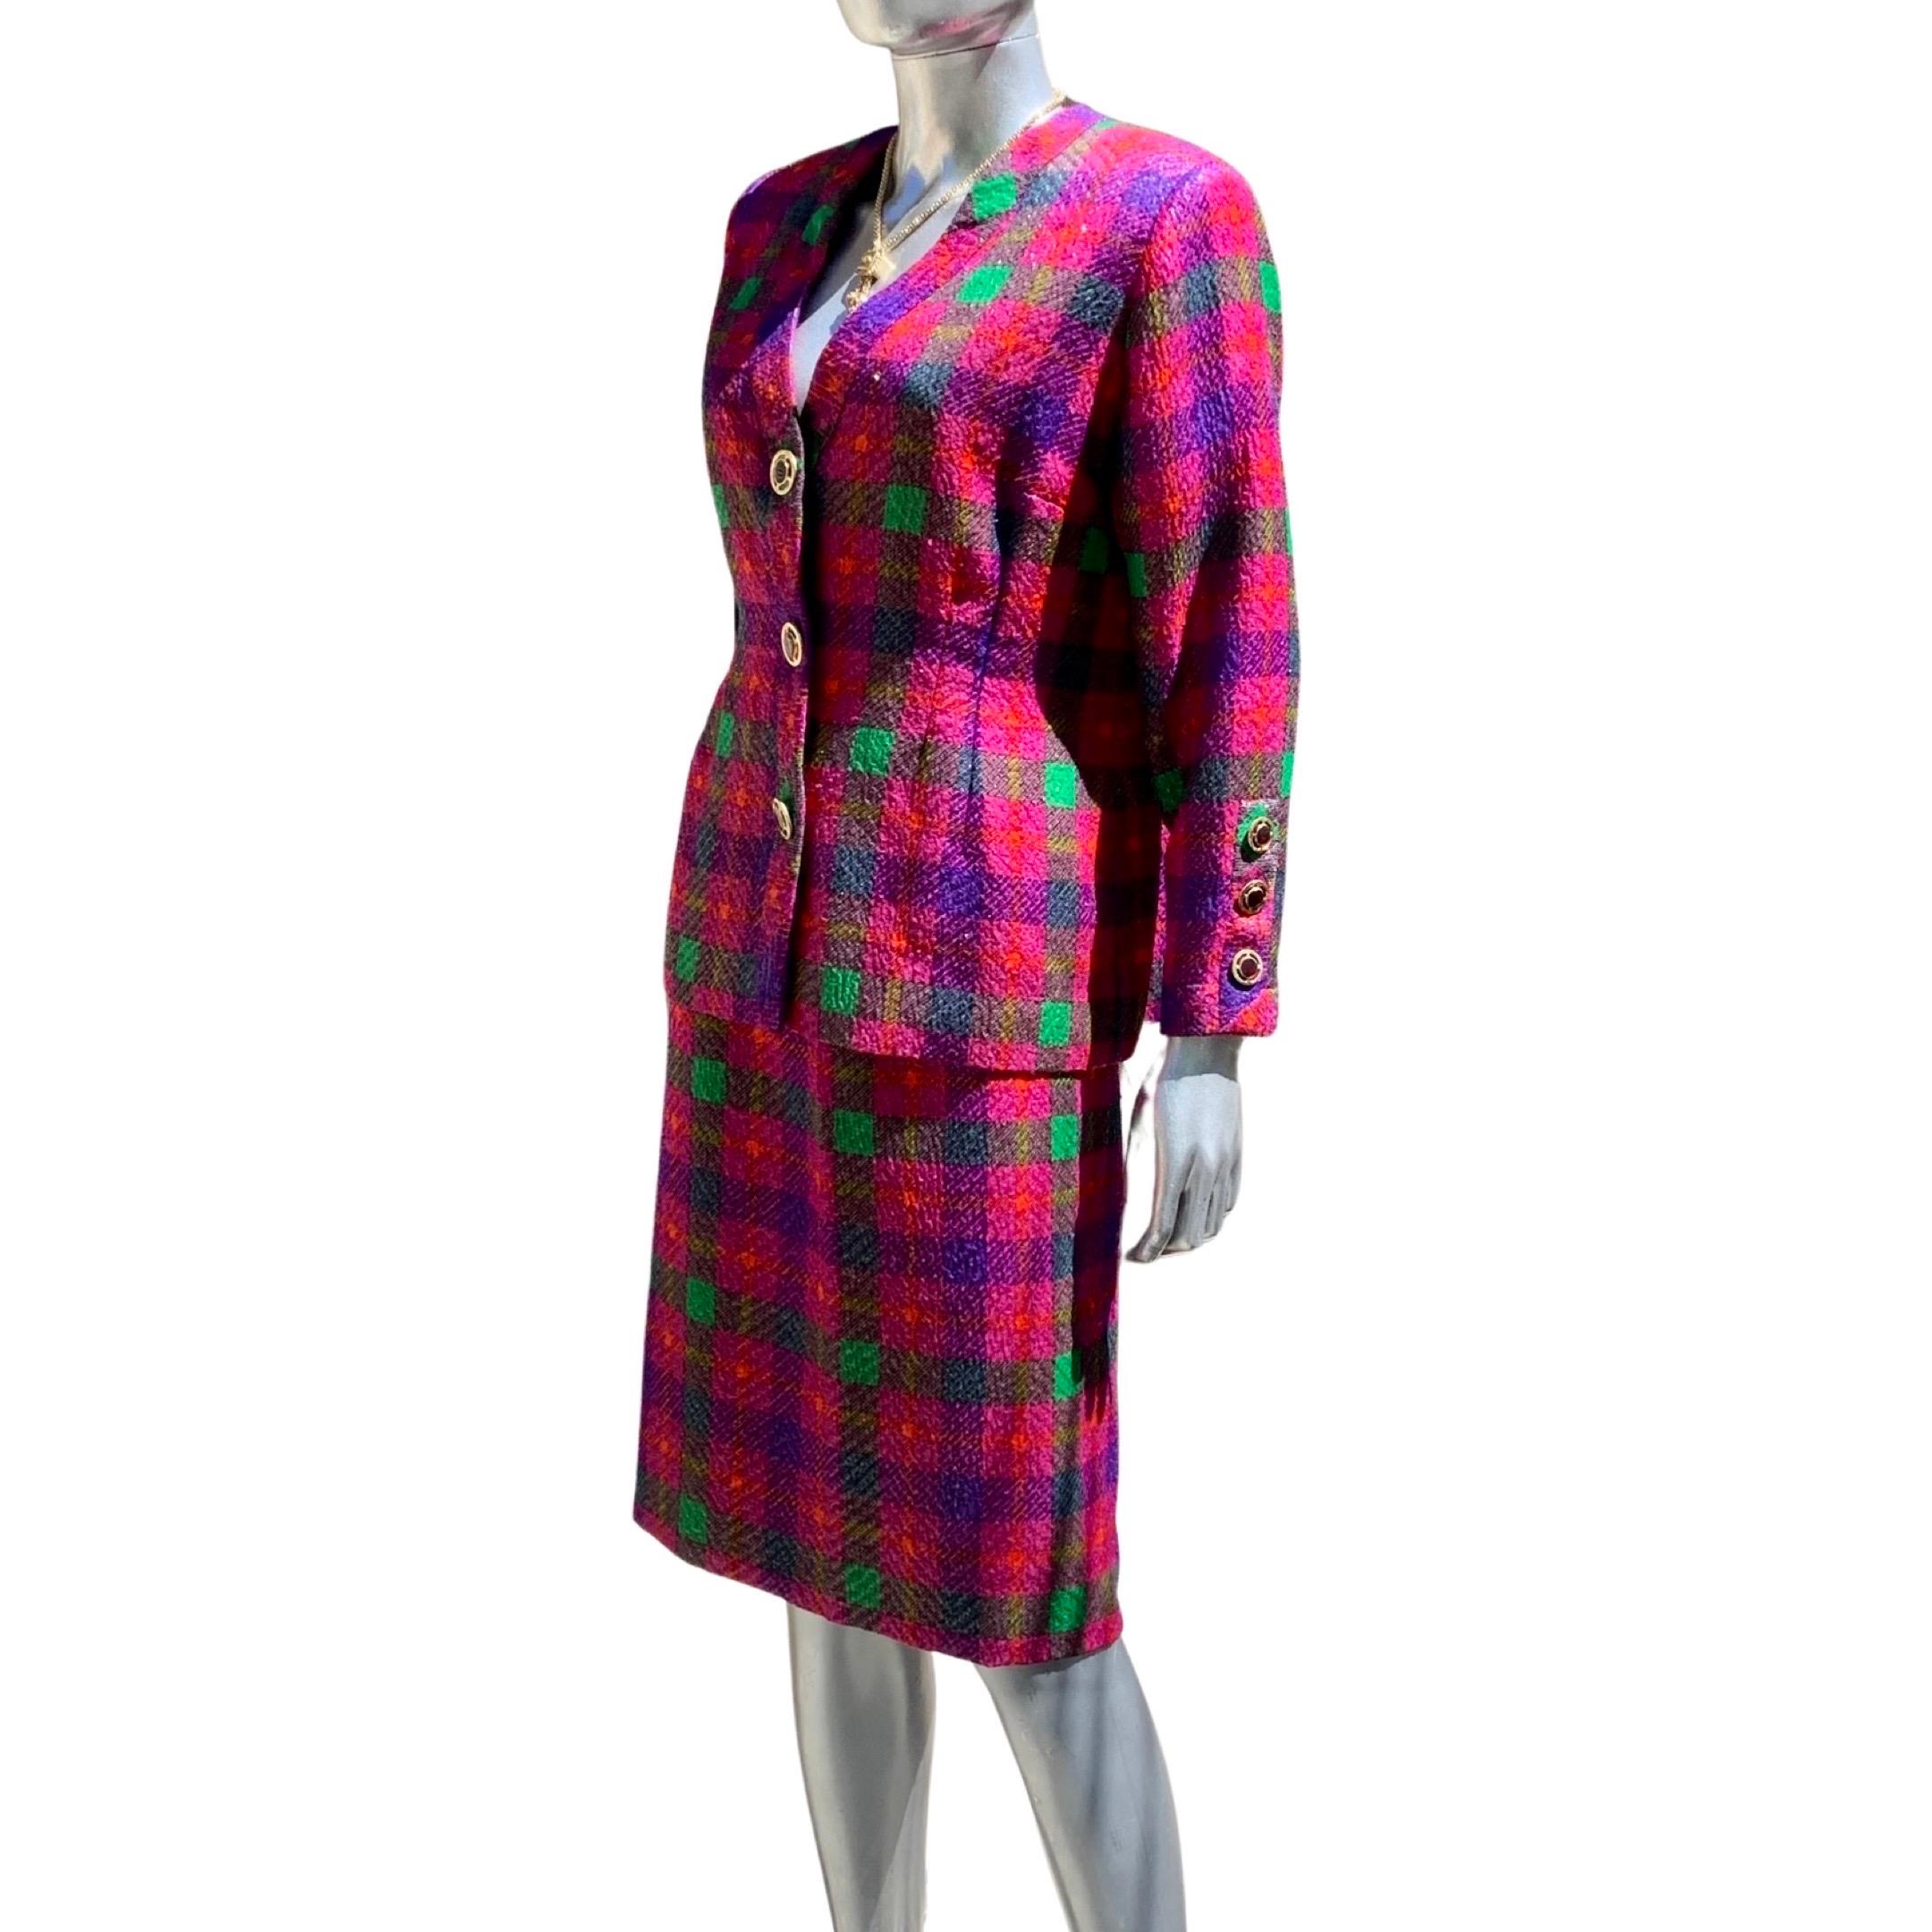 Metallic Jewel Tone Metallic Plaid Suit Vintage European Custom Made Size 6/8 In Good Condition For Sale In Palm Springs, CA